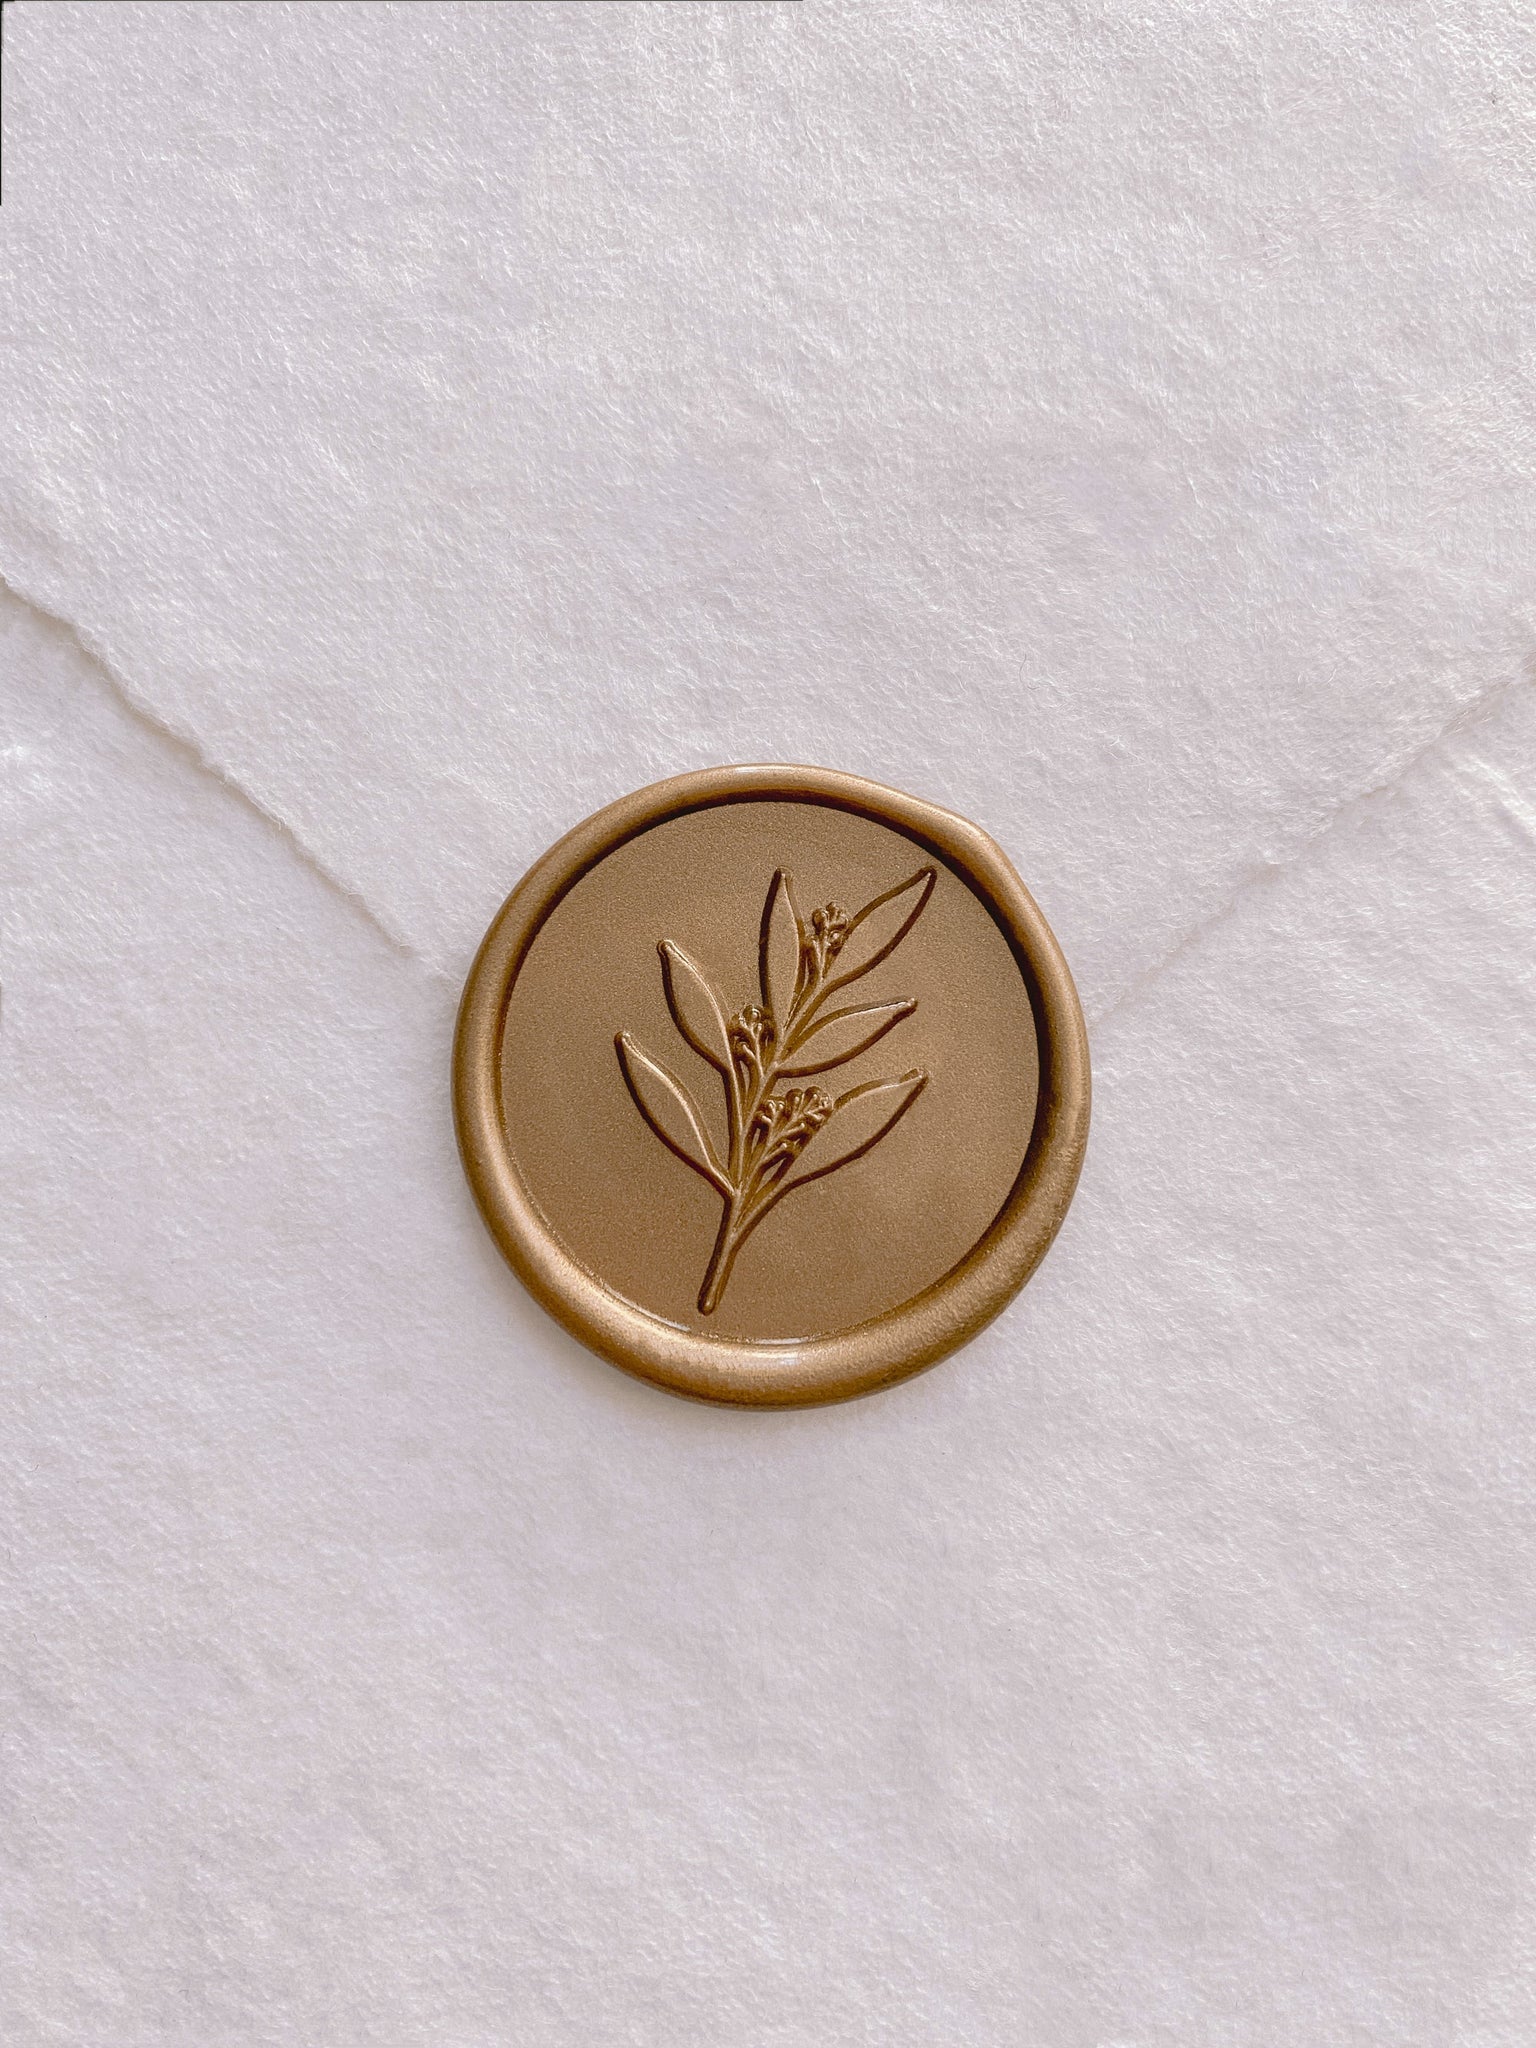 Leaf branch wax seal in gold on handmade paper envelope_front angle